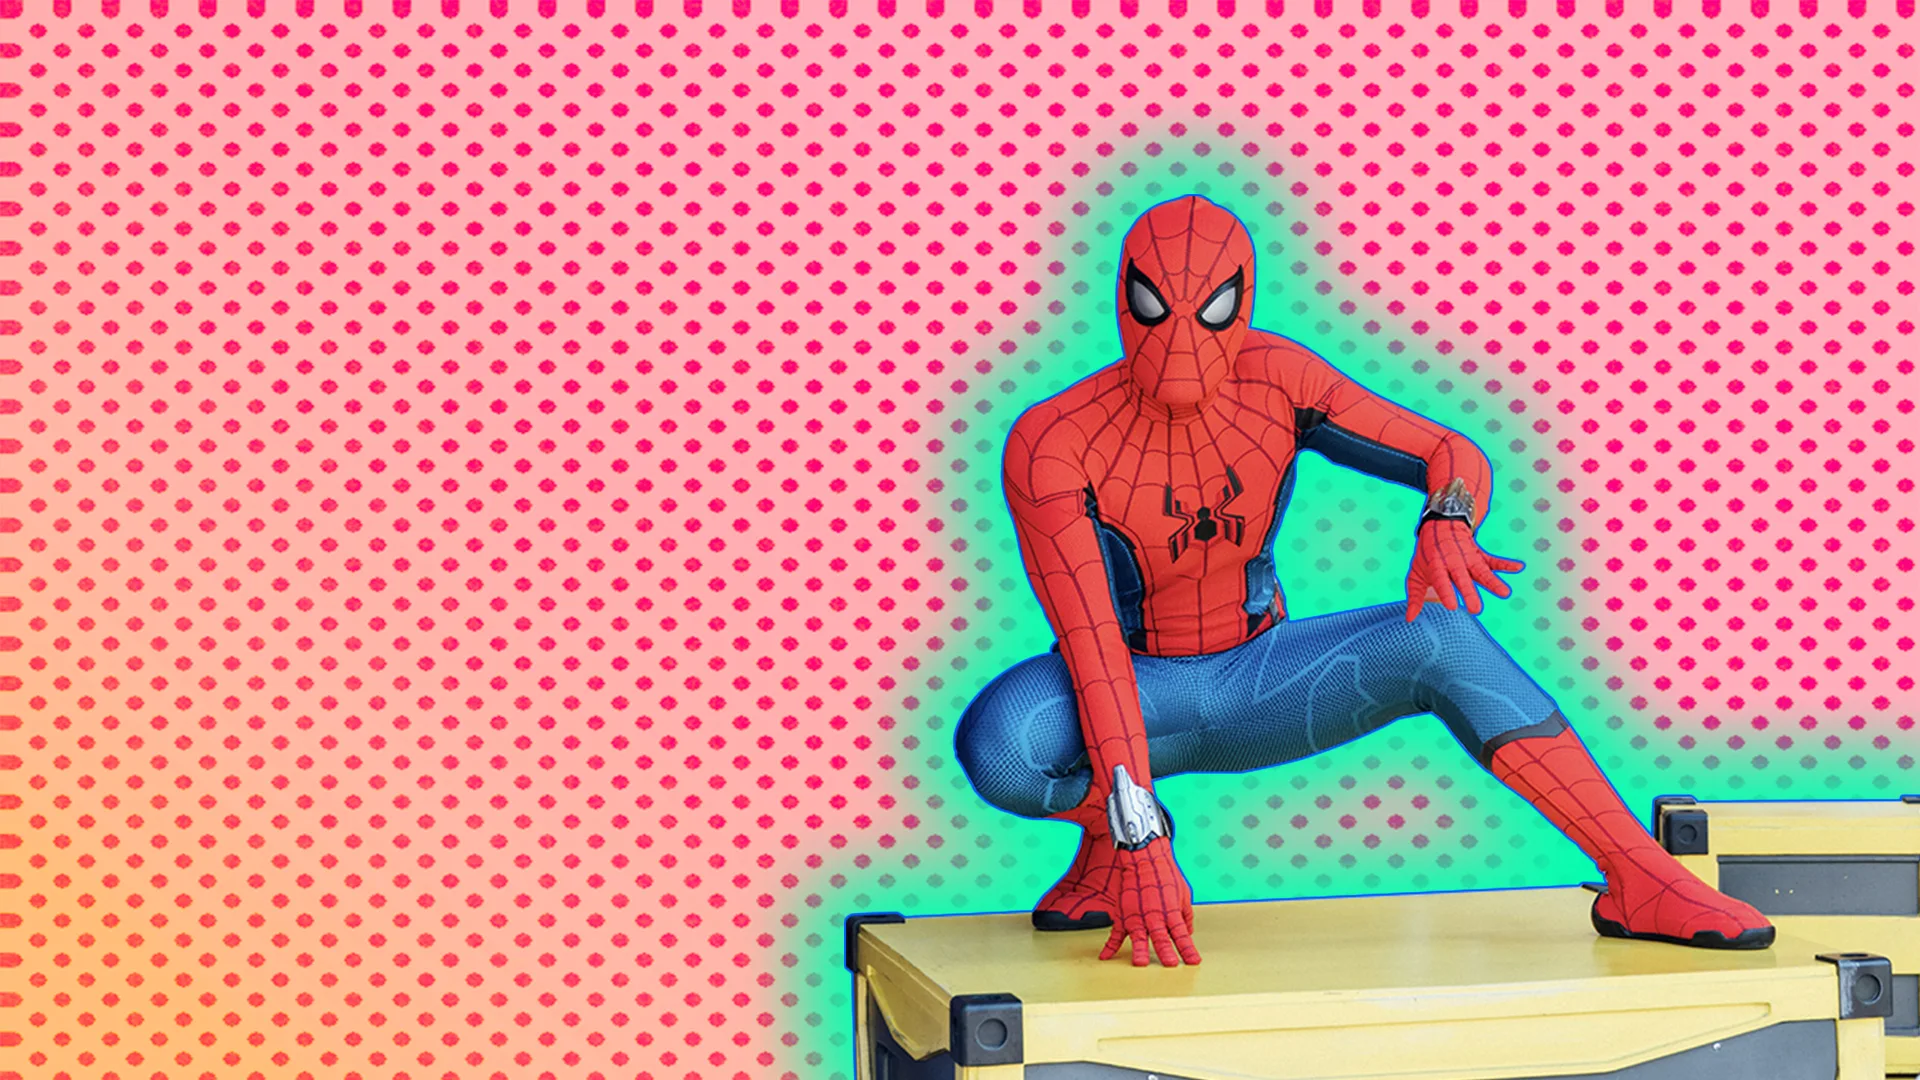 An image of Spiderman askew a box against a pink dotted background with a blue halo